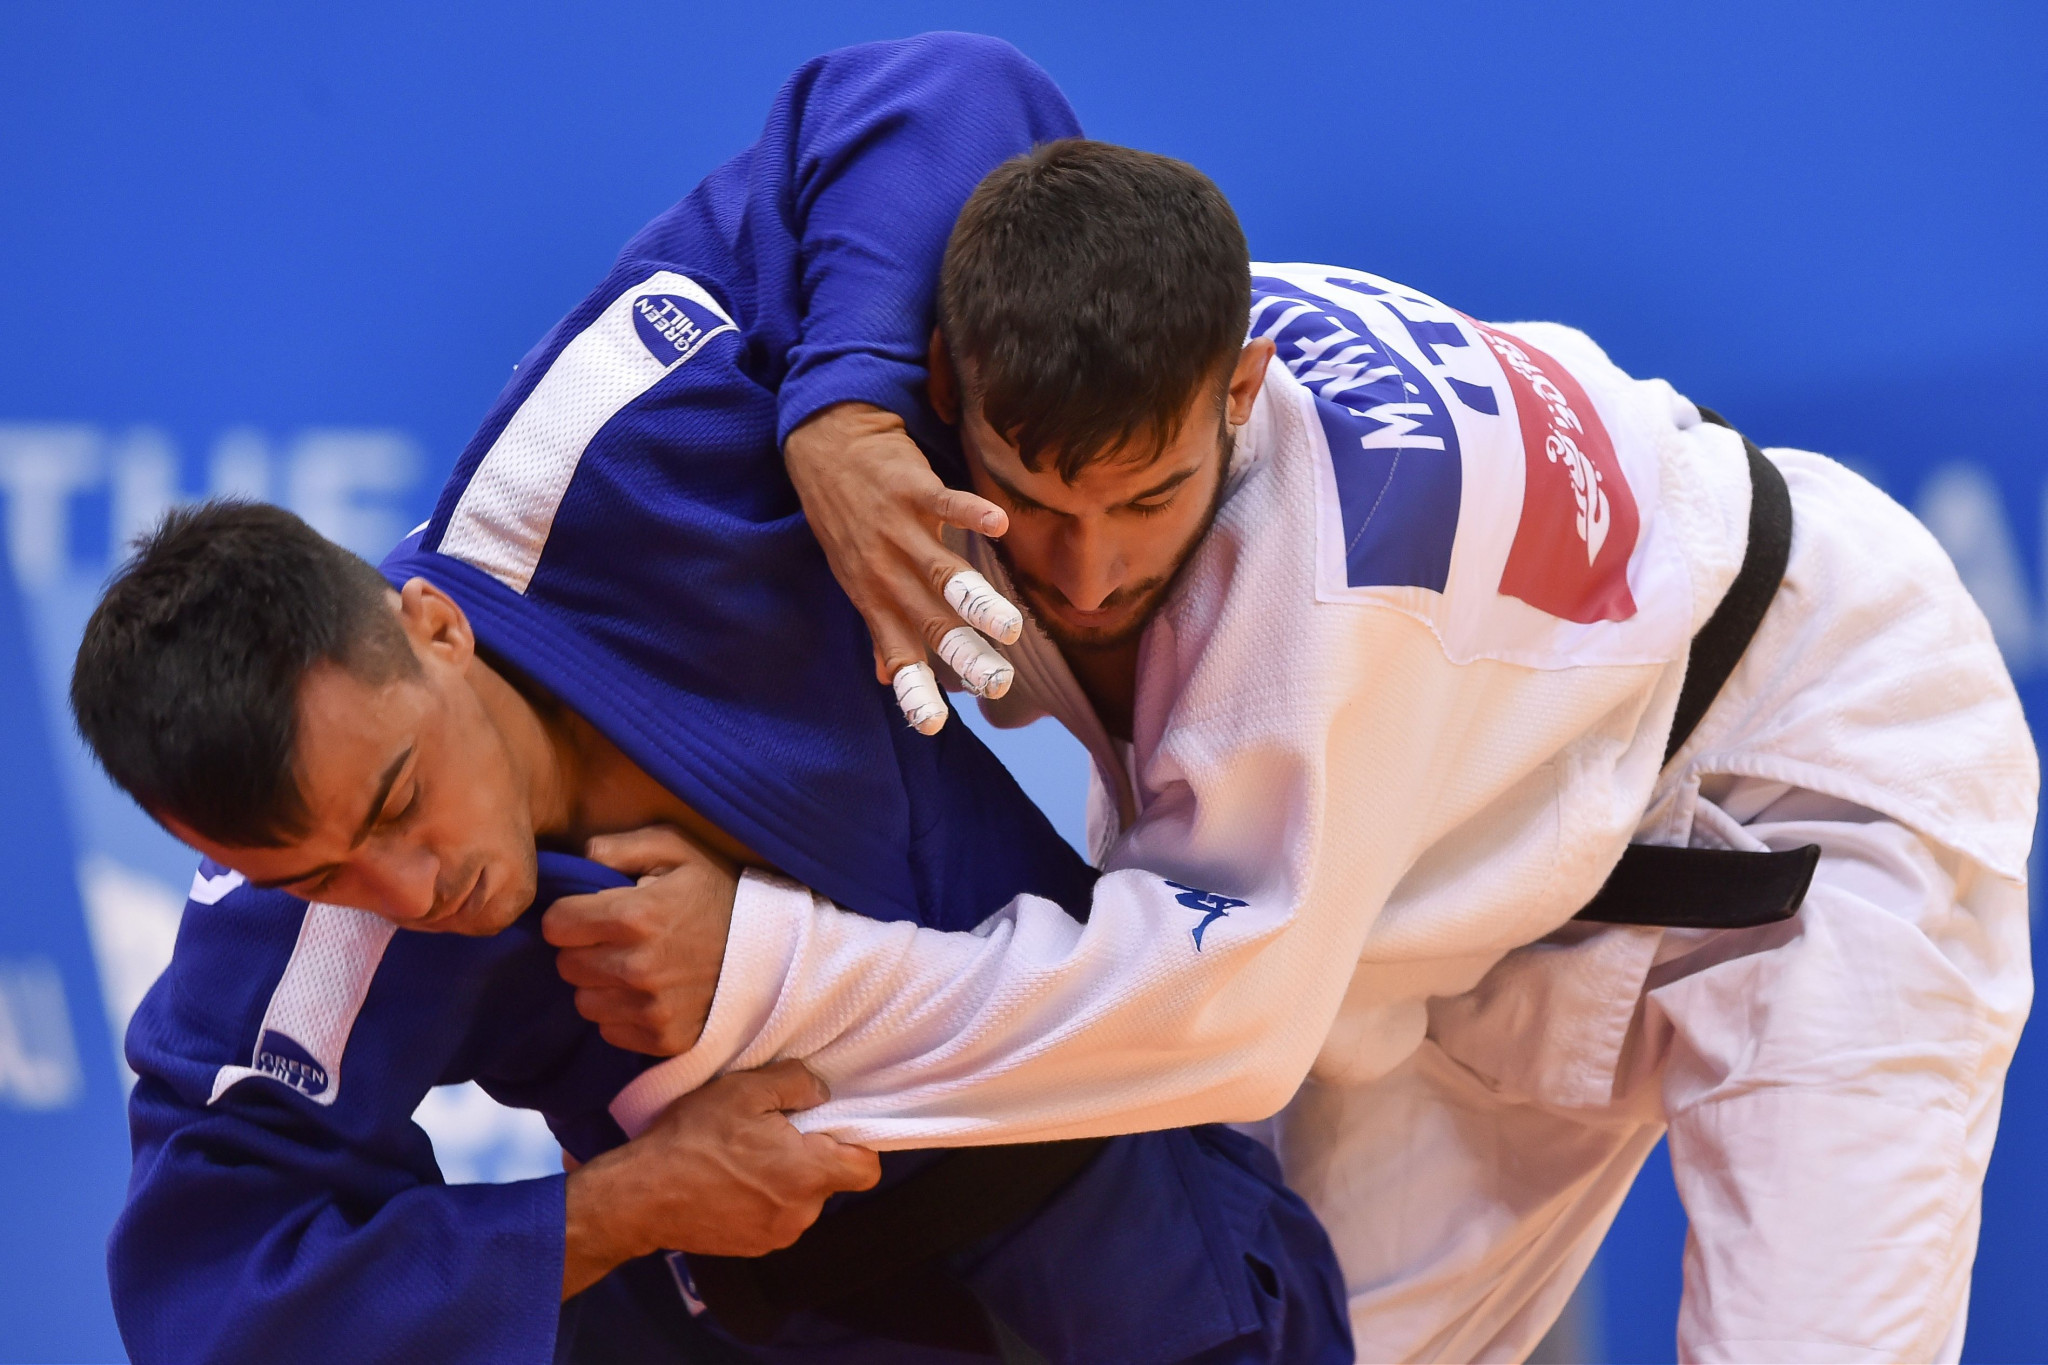 Away from the gymnastics, a number of other sports got under way, including judo ©Getty Images